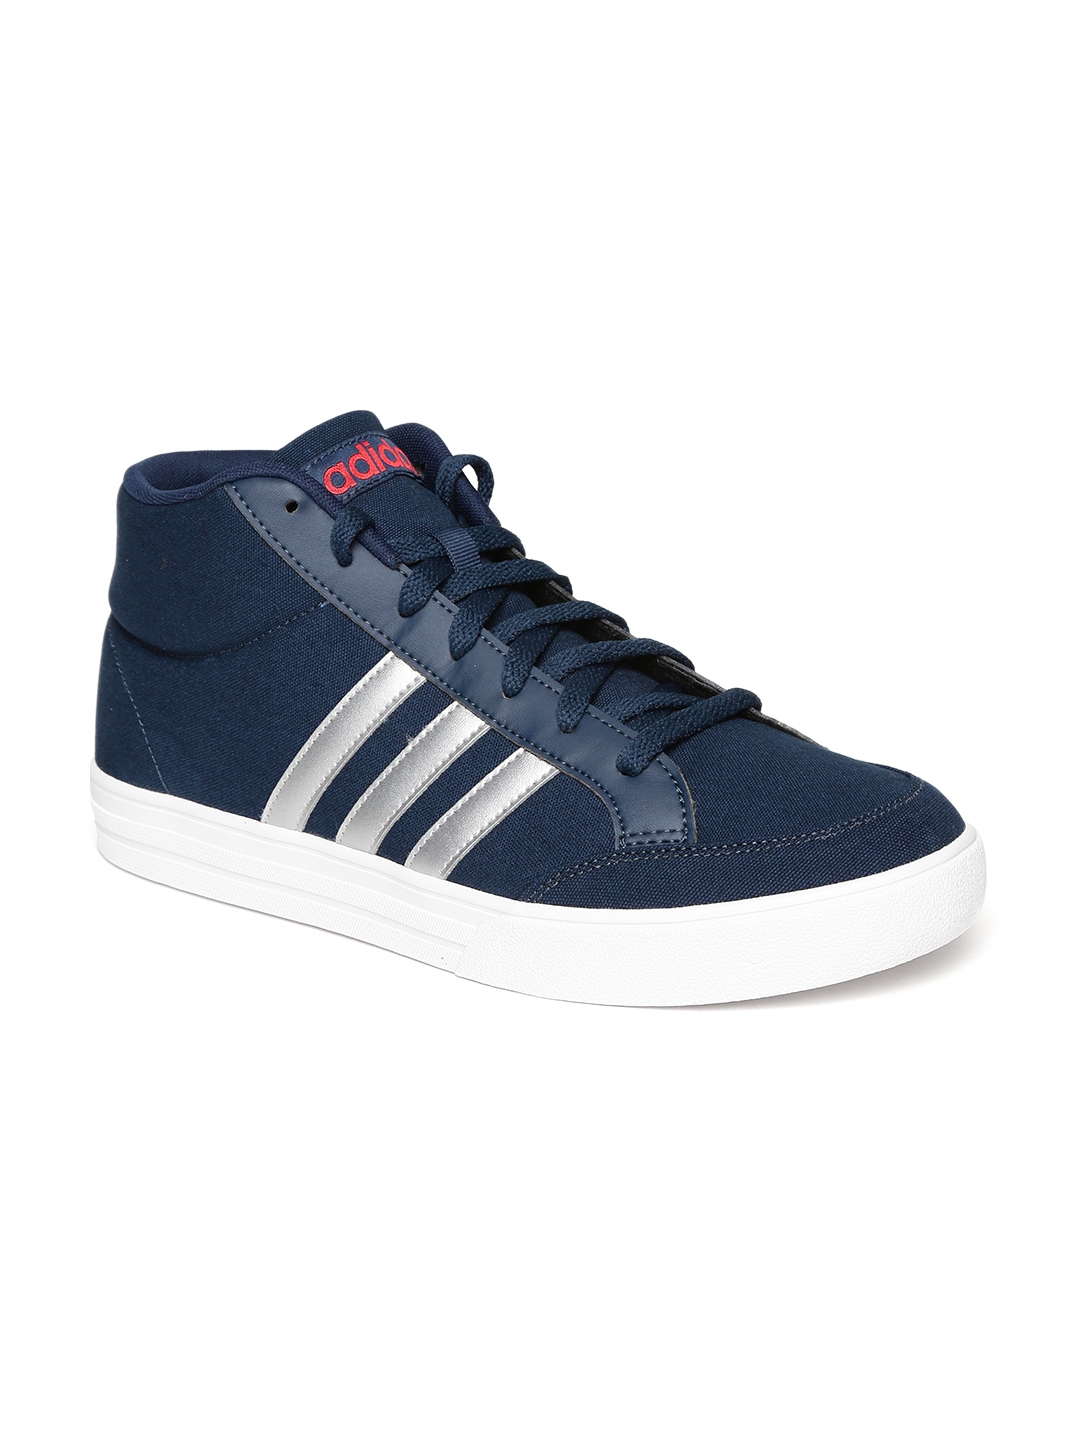 Buy ADIDAS Men Navy Blue VS SET MID Sneakers - Casual Shoes for Men